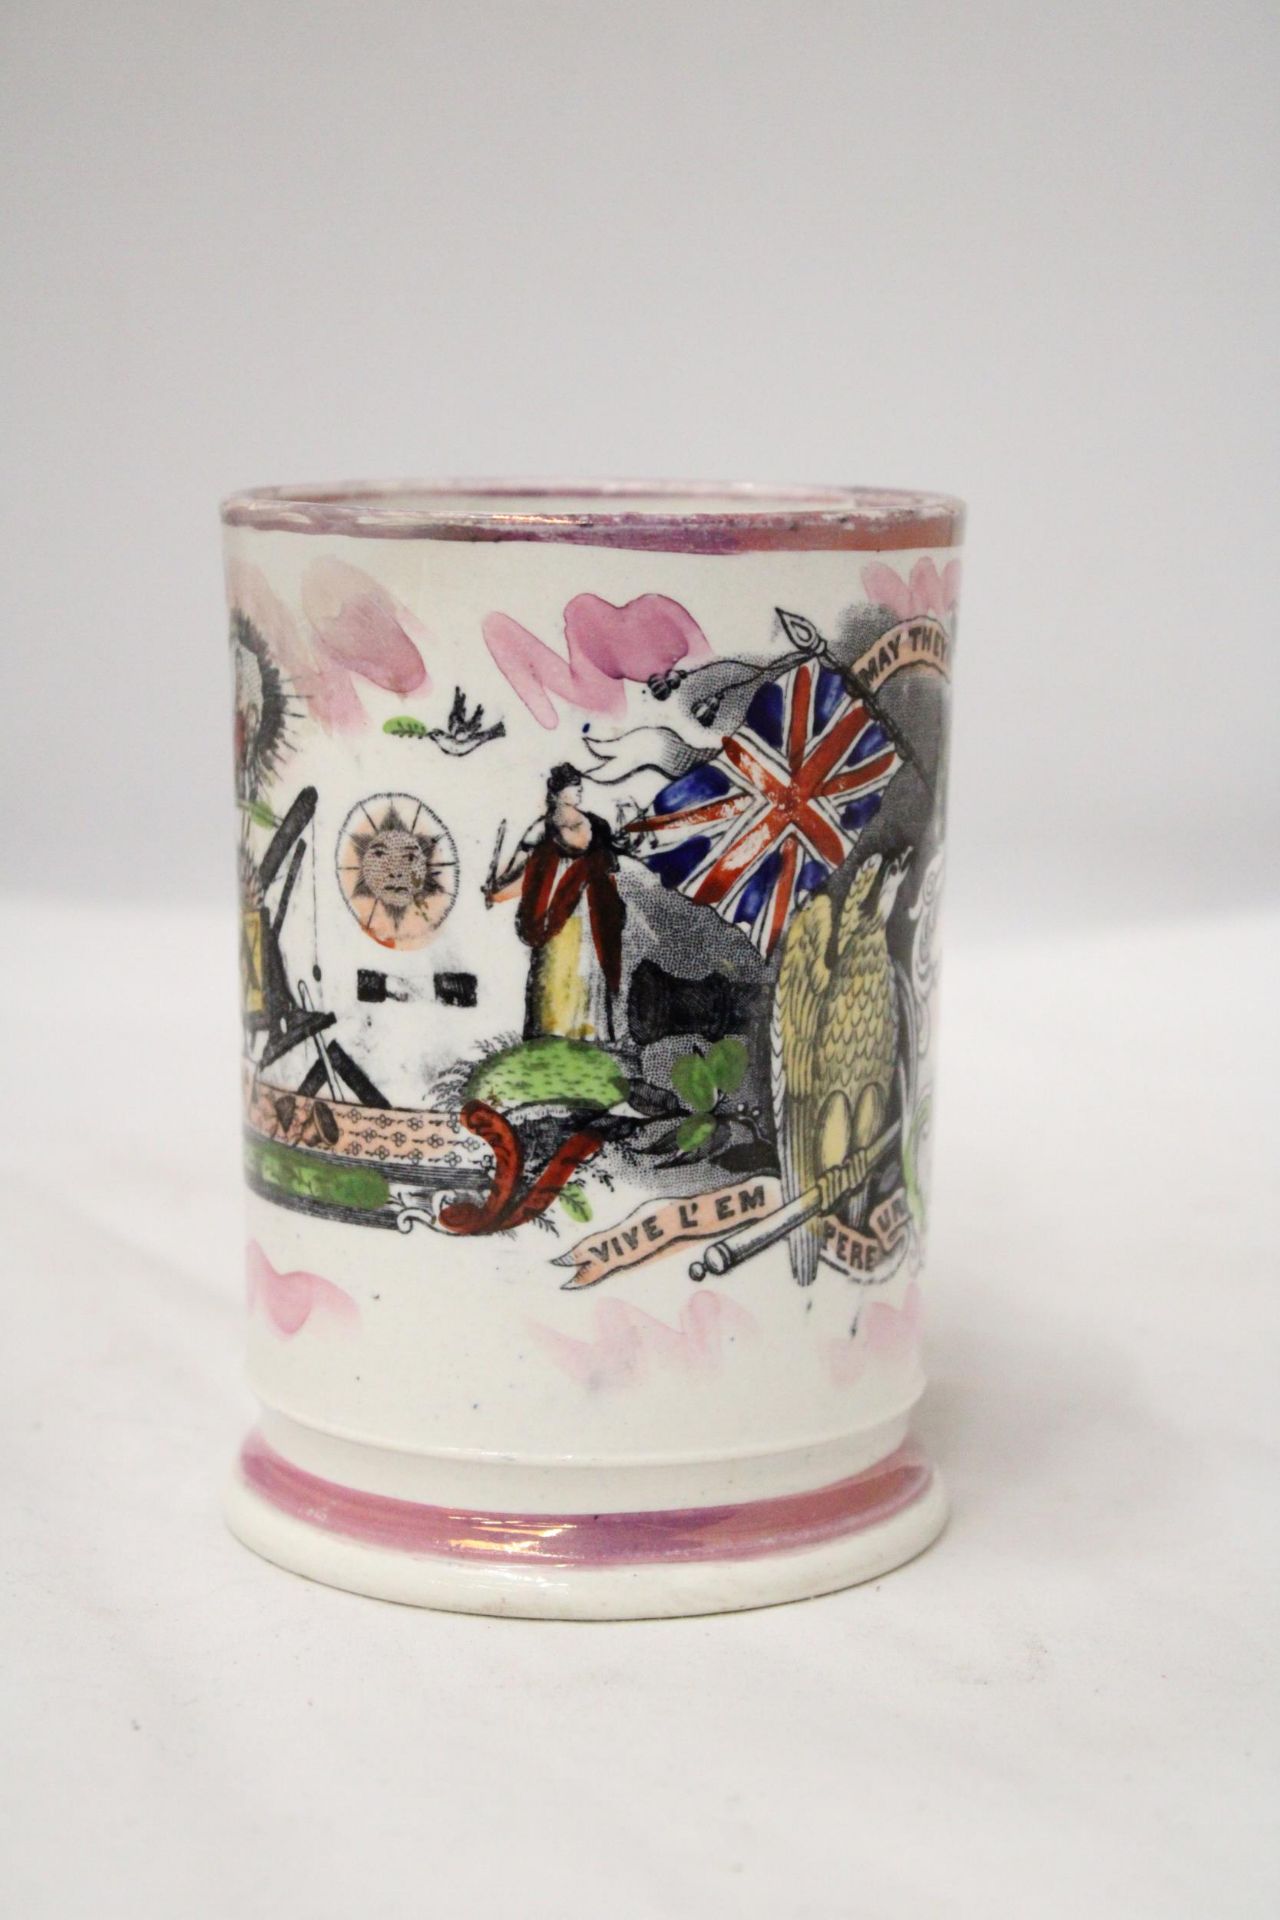 A 19TH CENTURY STAFFORDSHIRE POTTERY FROG MUG WITH 'GOD SAVE THE QUEEN' EMBLEM - Image 2 of 5